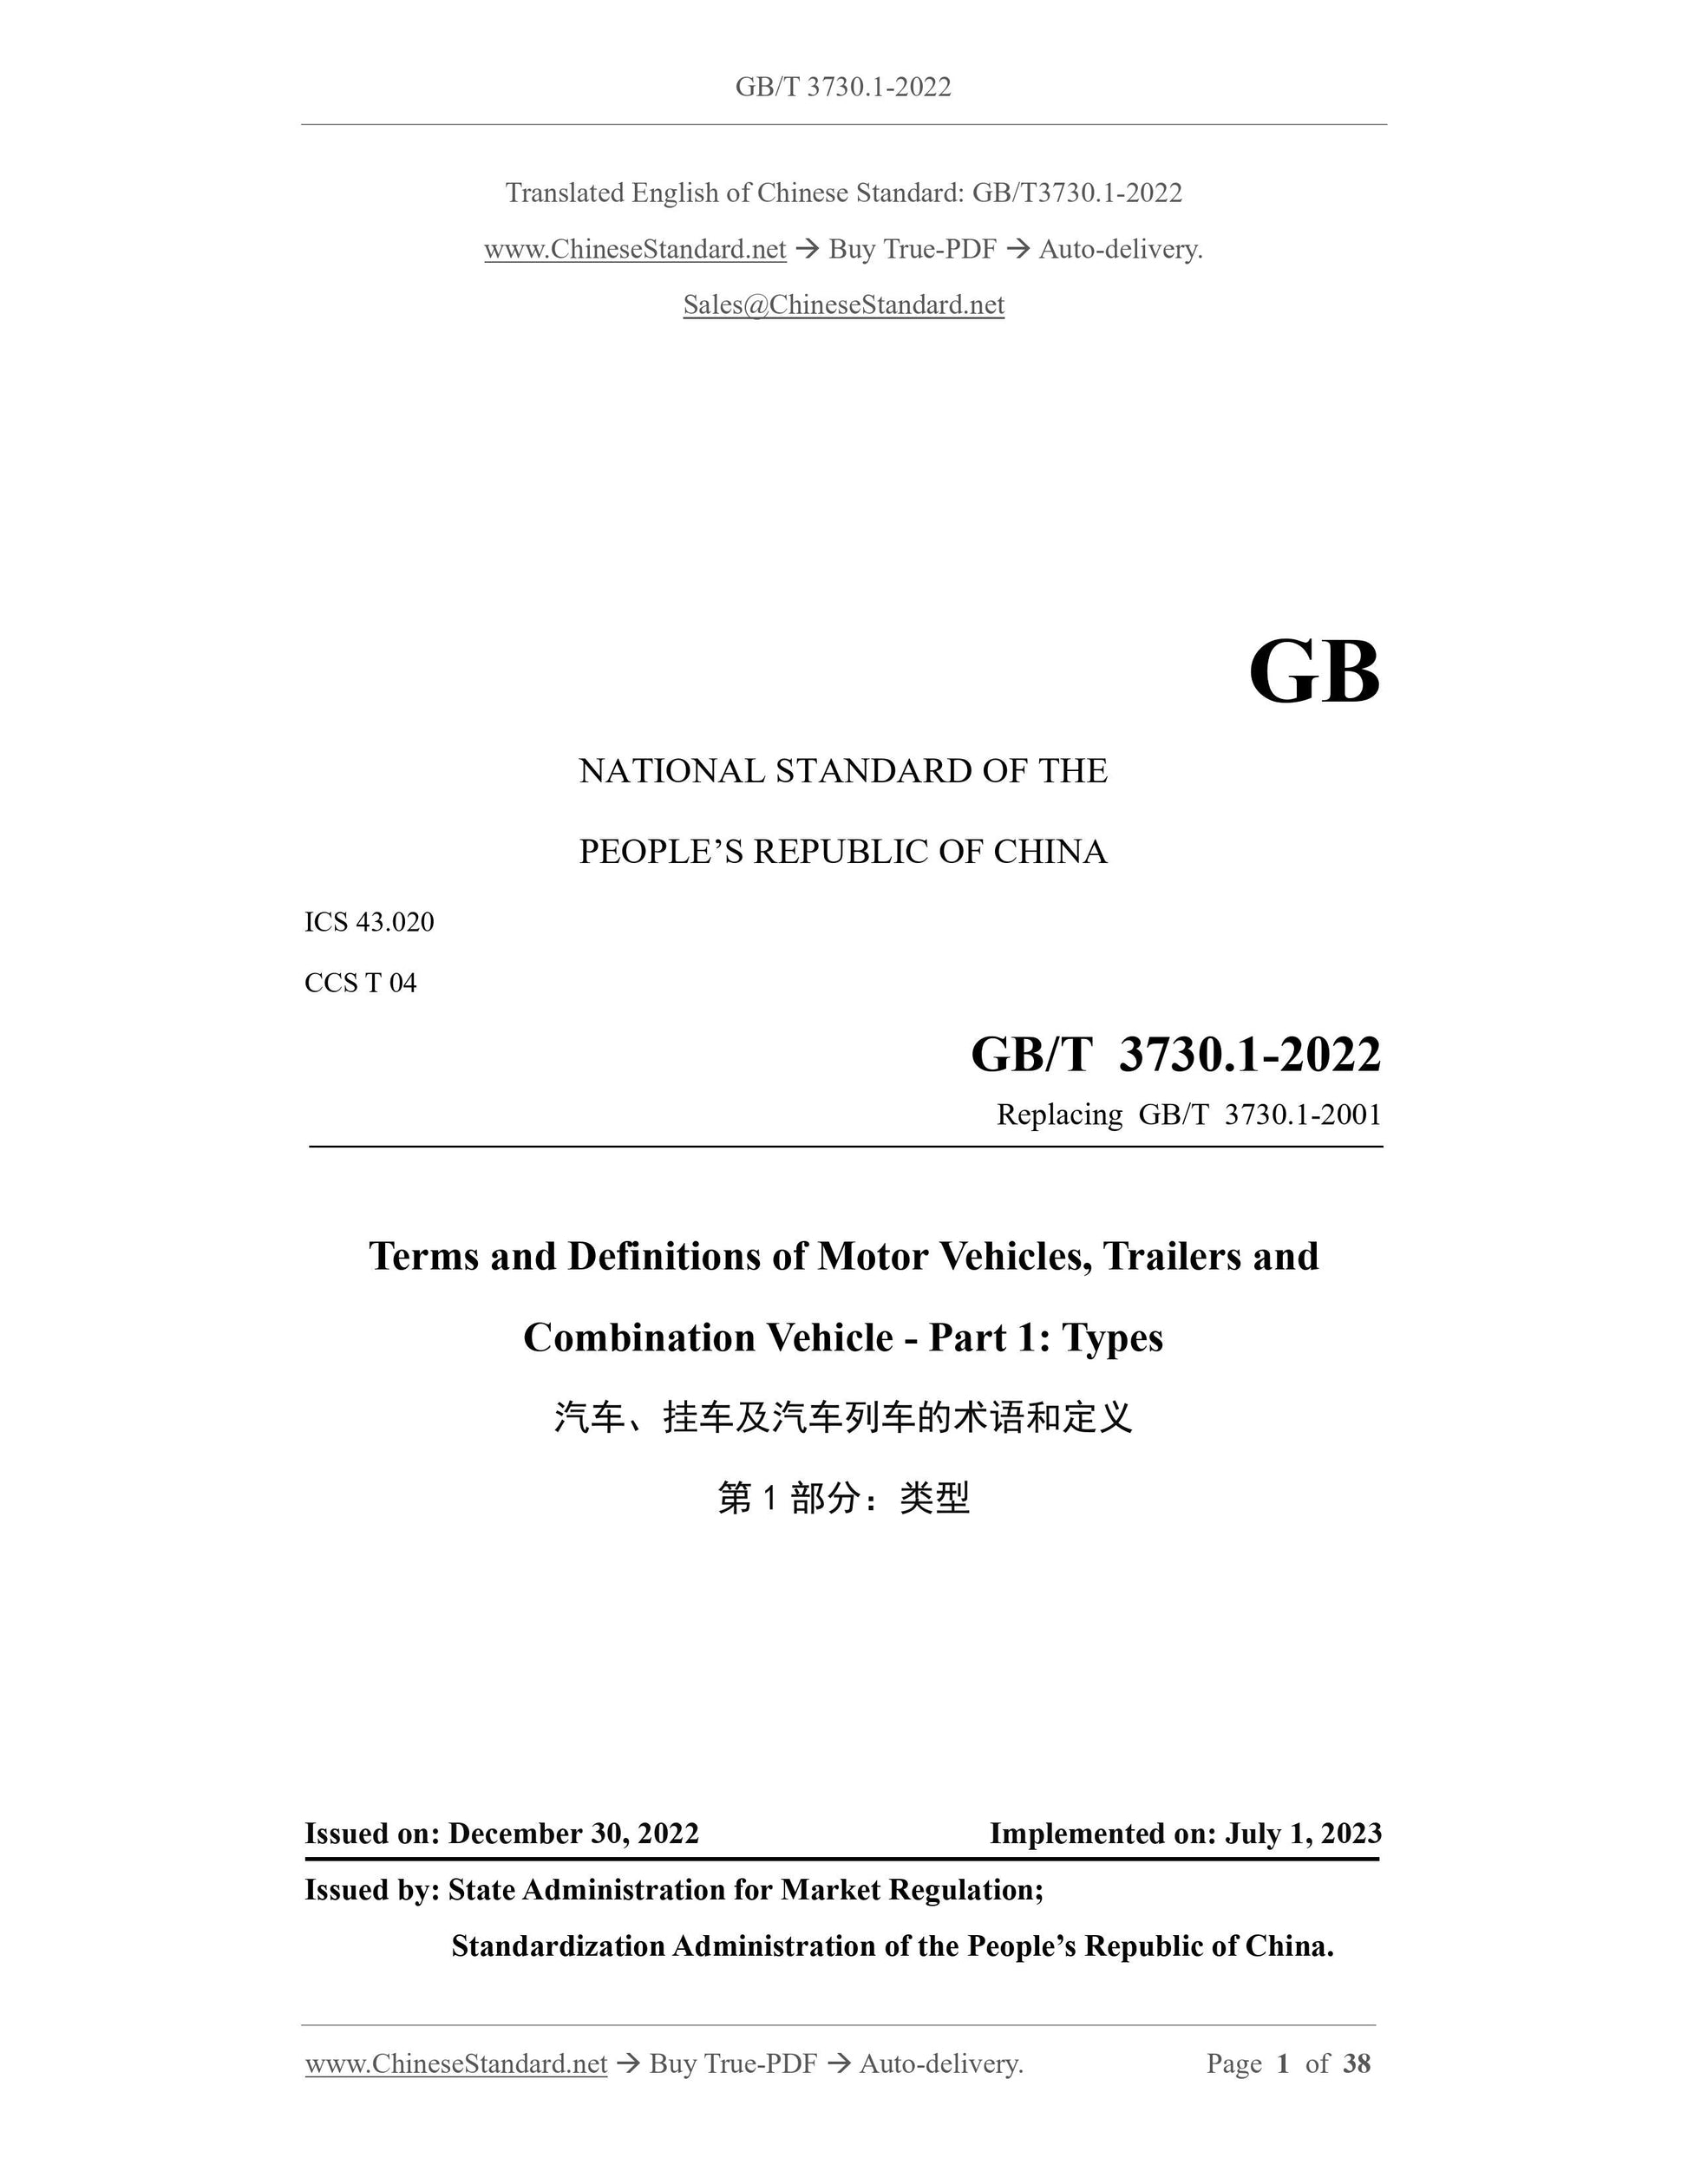 GB/T 3730.1-2022 Page 1